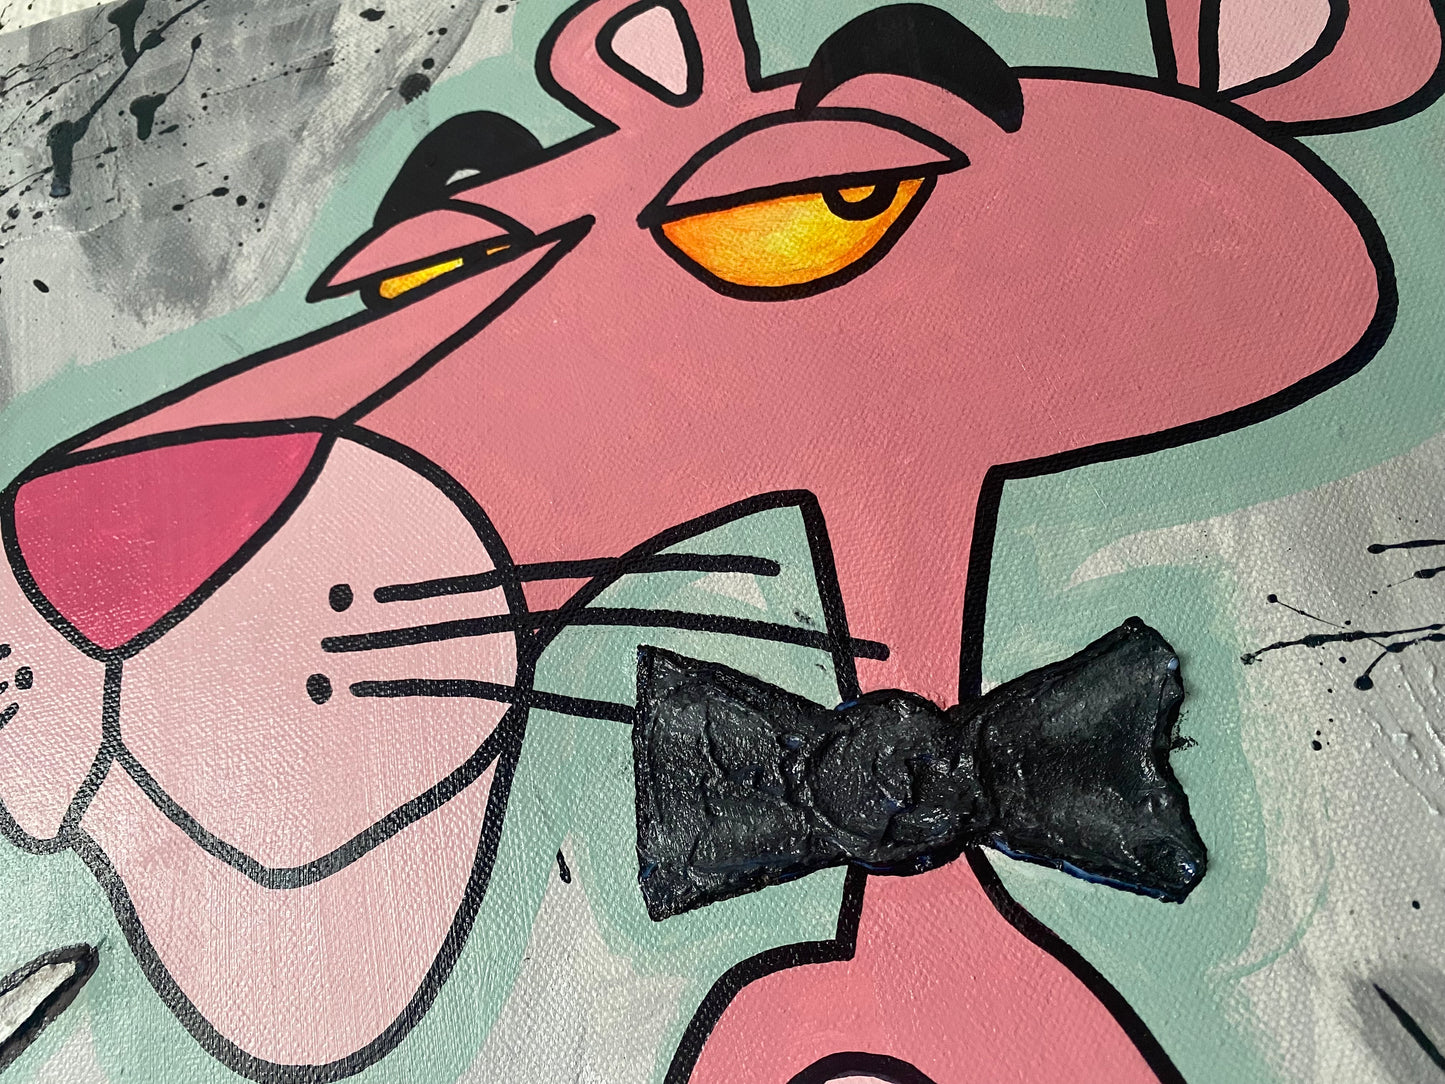 Acrylic Painting on Canvas "PINK PANTHER"